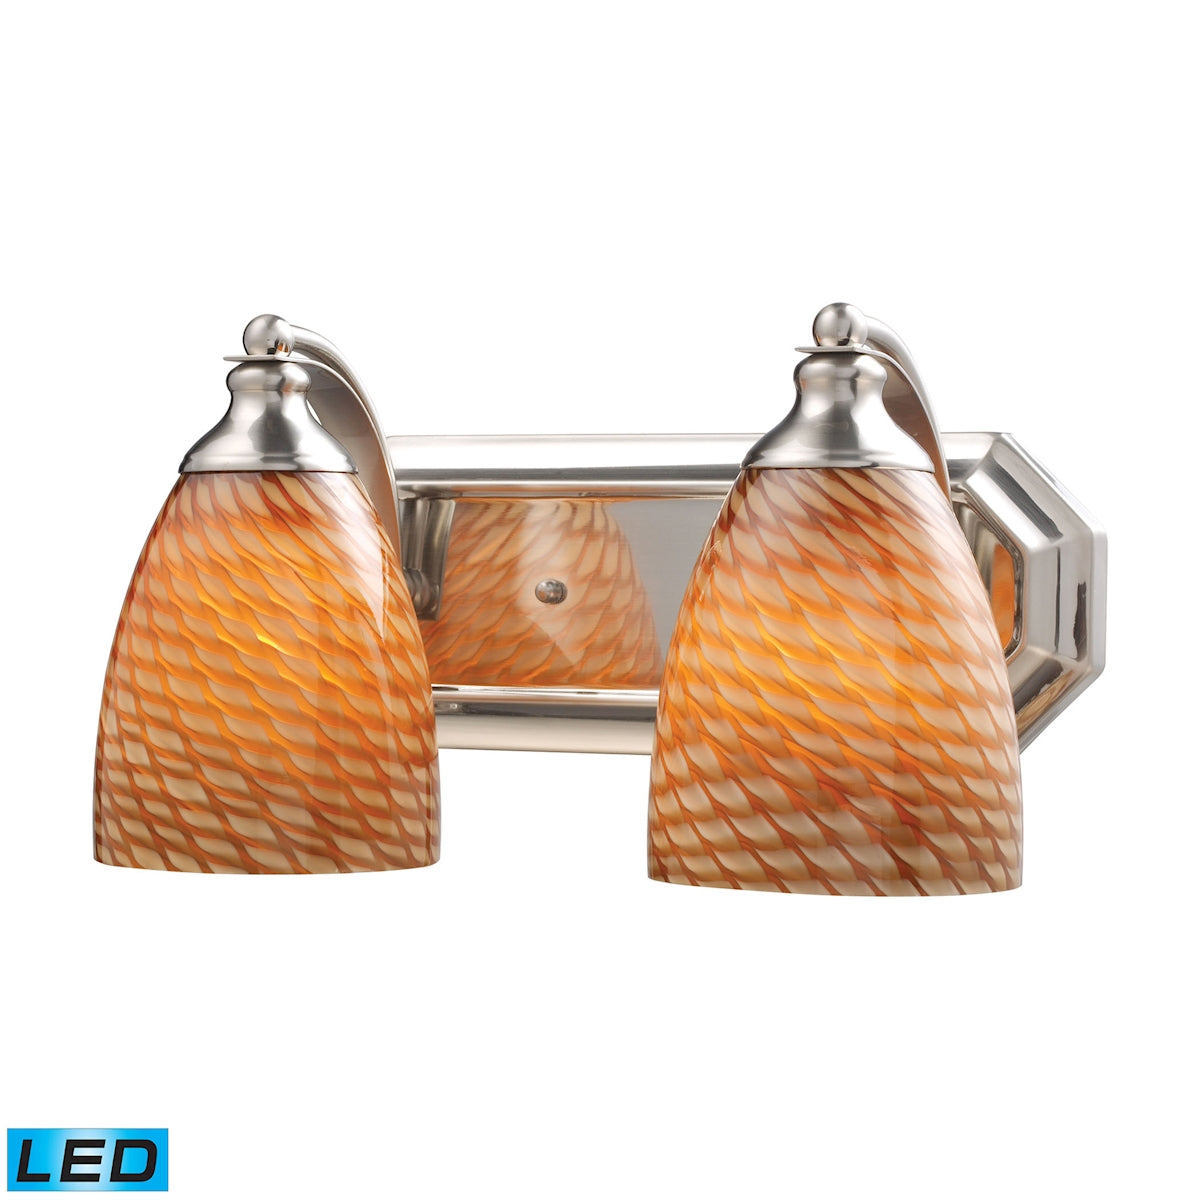 ELK Lighting 570-2N-C-LED Mix-N-Match Vanity 2-Light Wall Lamp in Satin Nickel with Cocoa Glass - Includes LED Bulbs